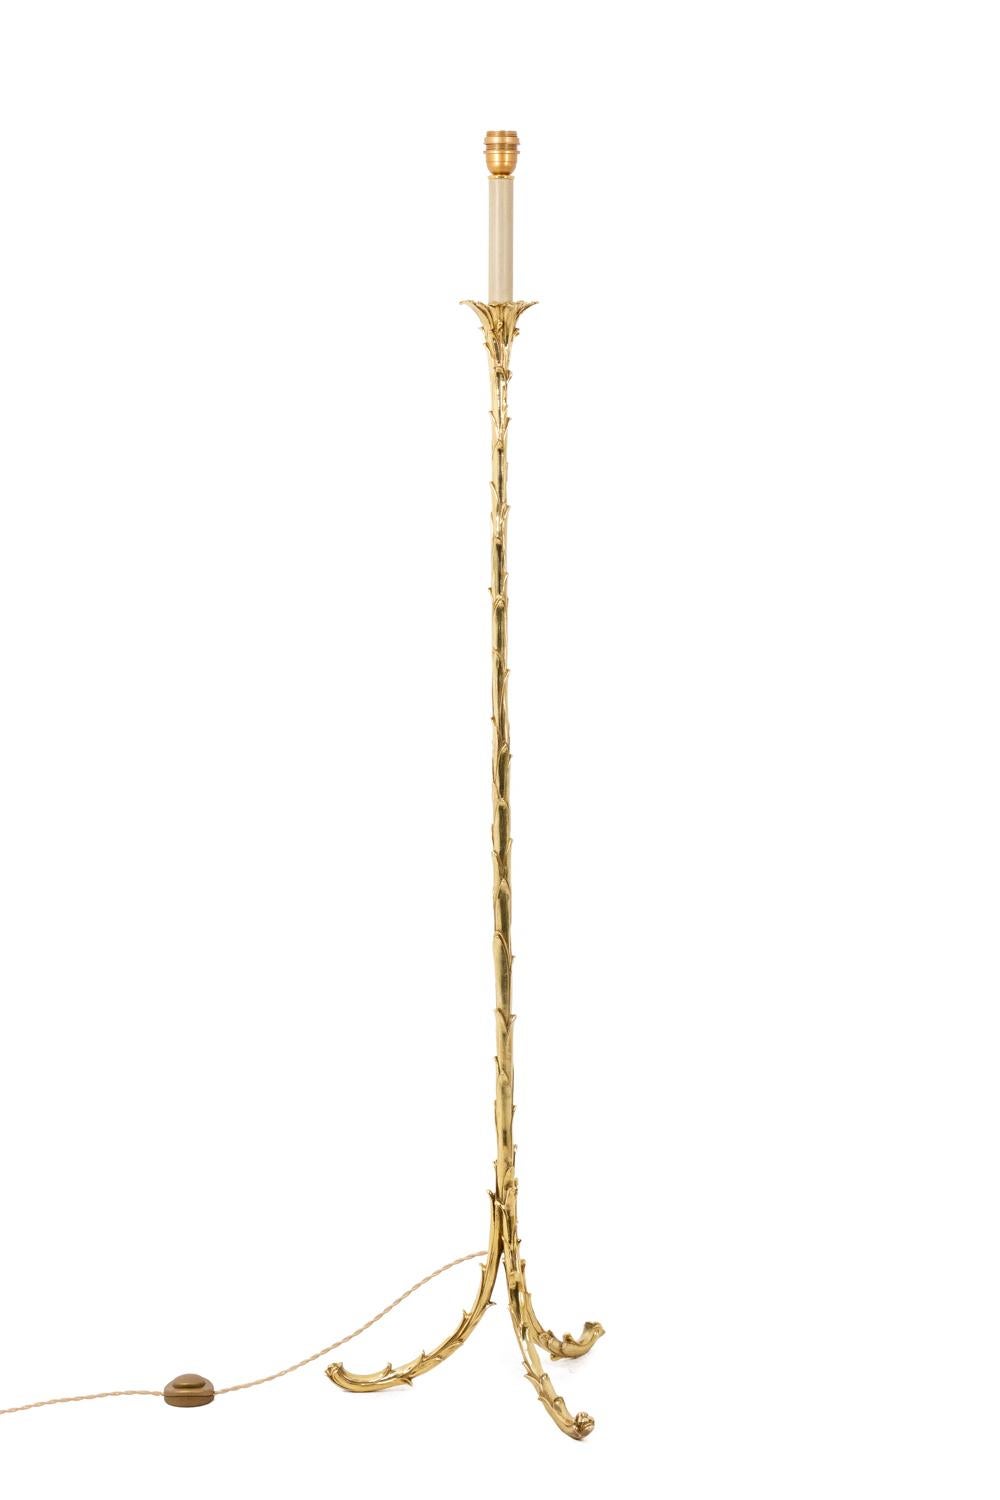 Maison Baguès, edited by. 

Tripod floor lamp in gilt bronze, standing on three curved feet. Shaft made up of three stems imitating bamboo.

Work realized in the 1970s.